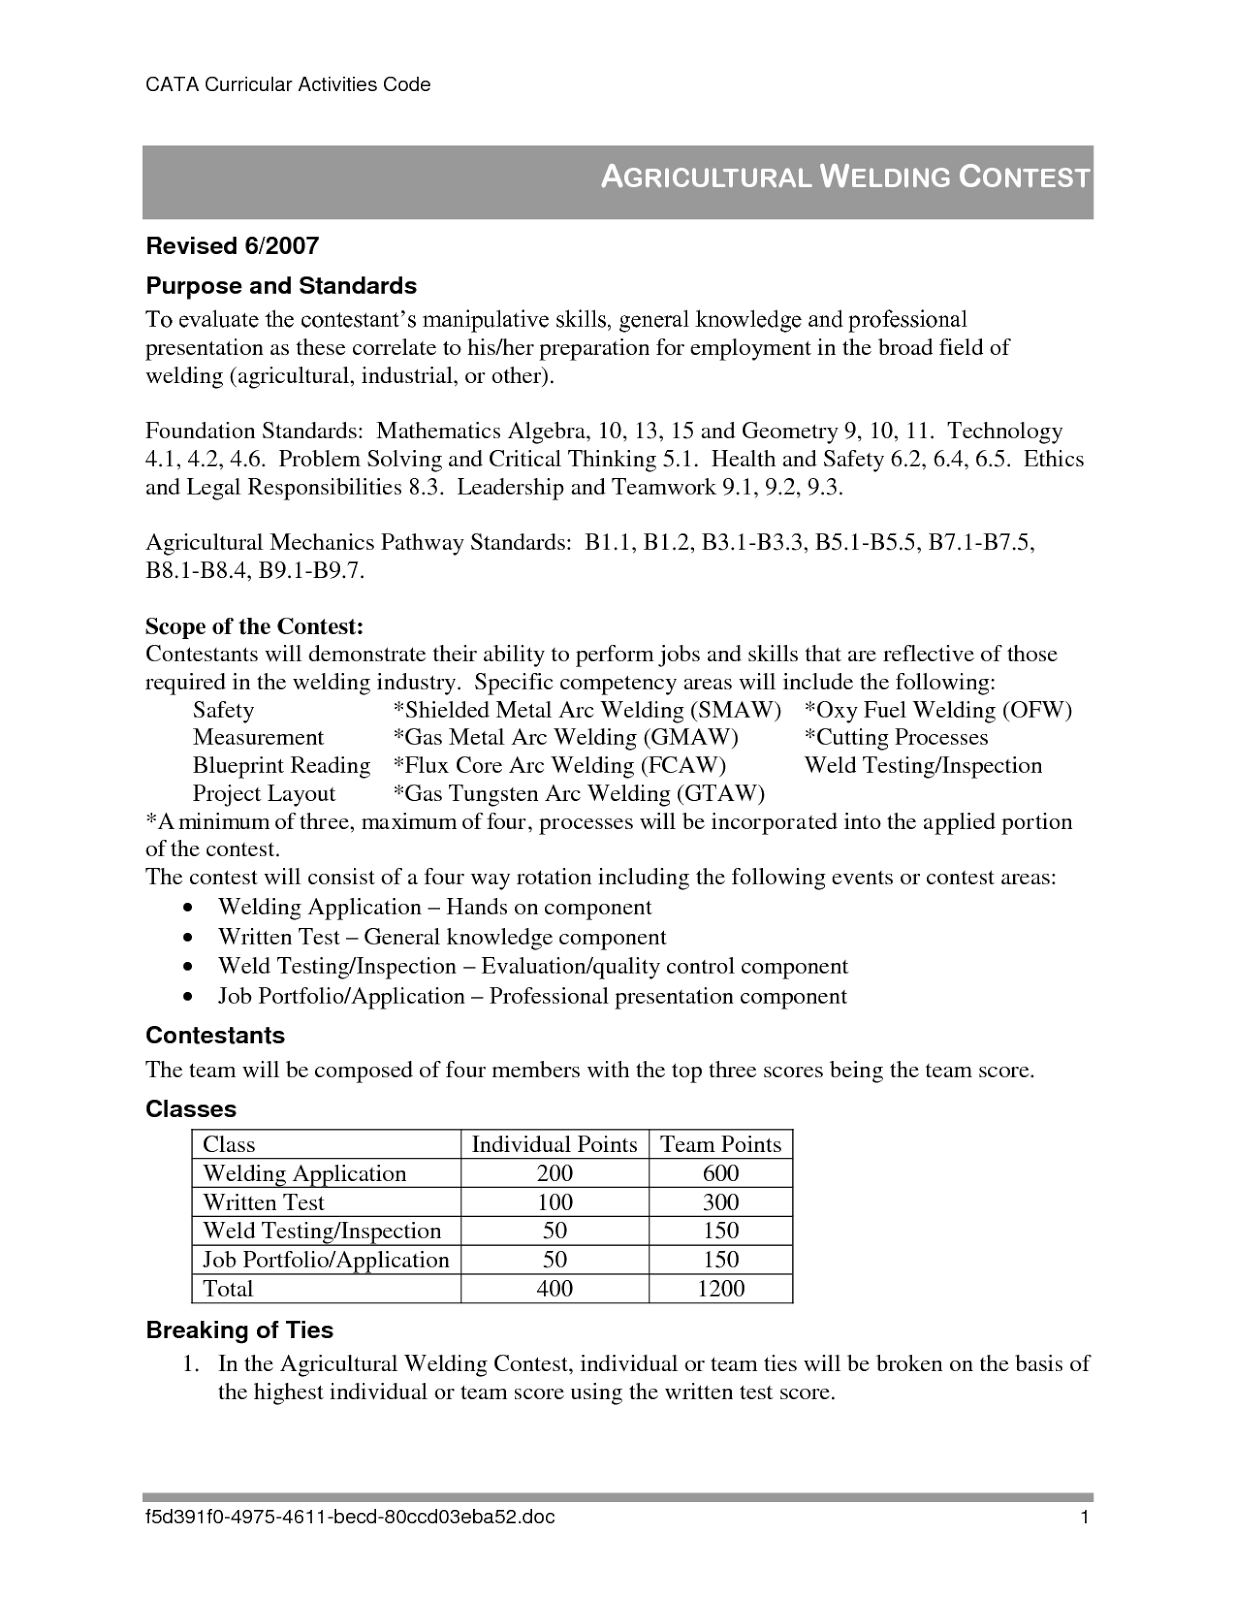 Resume for construction or welding